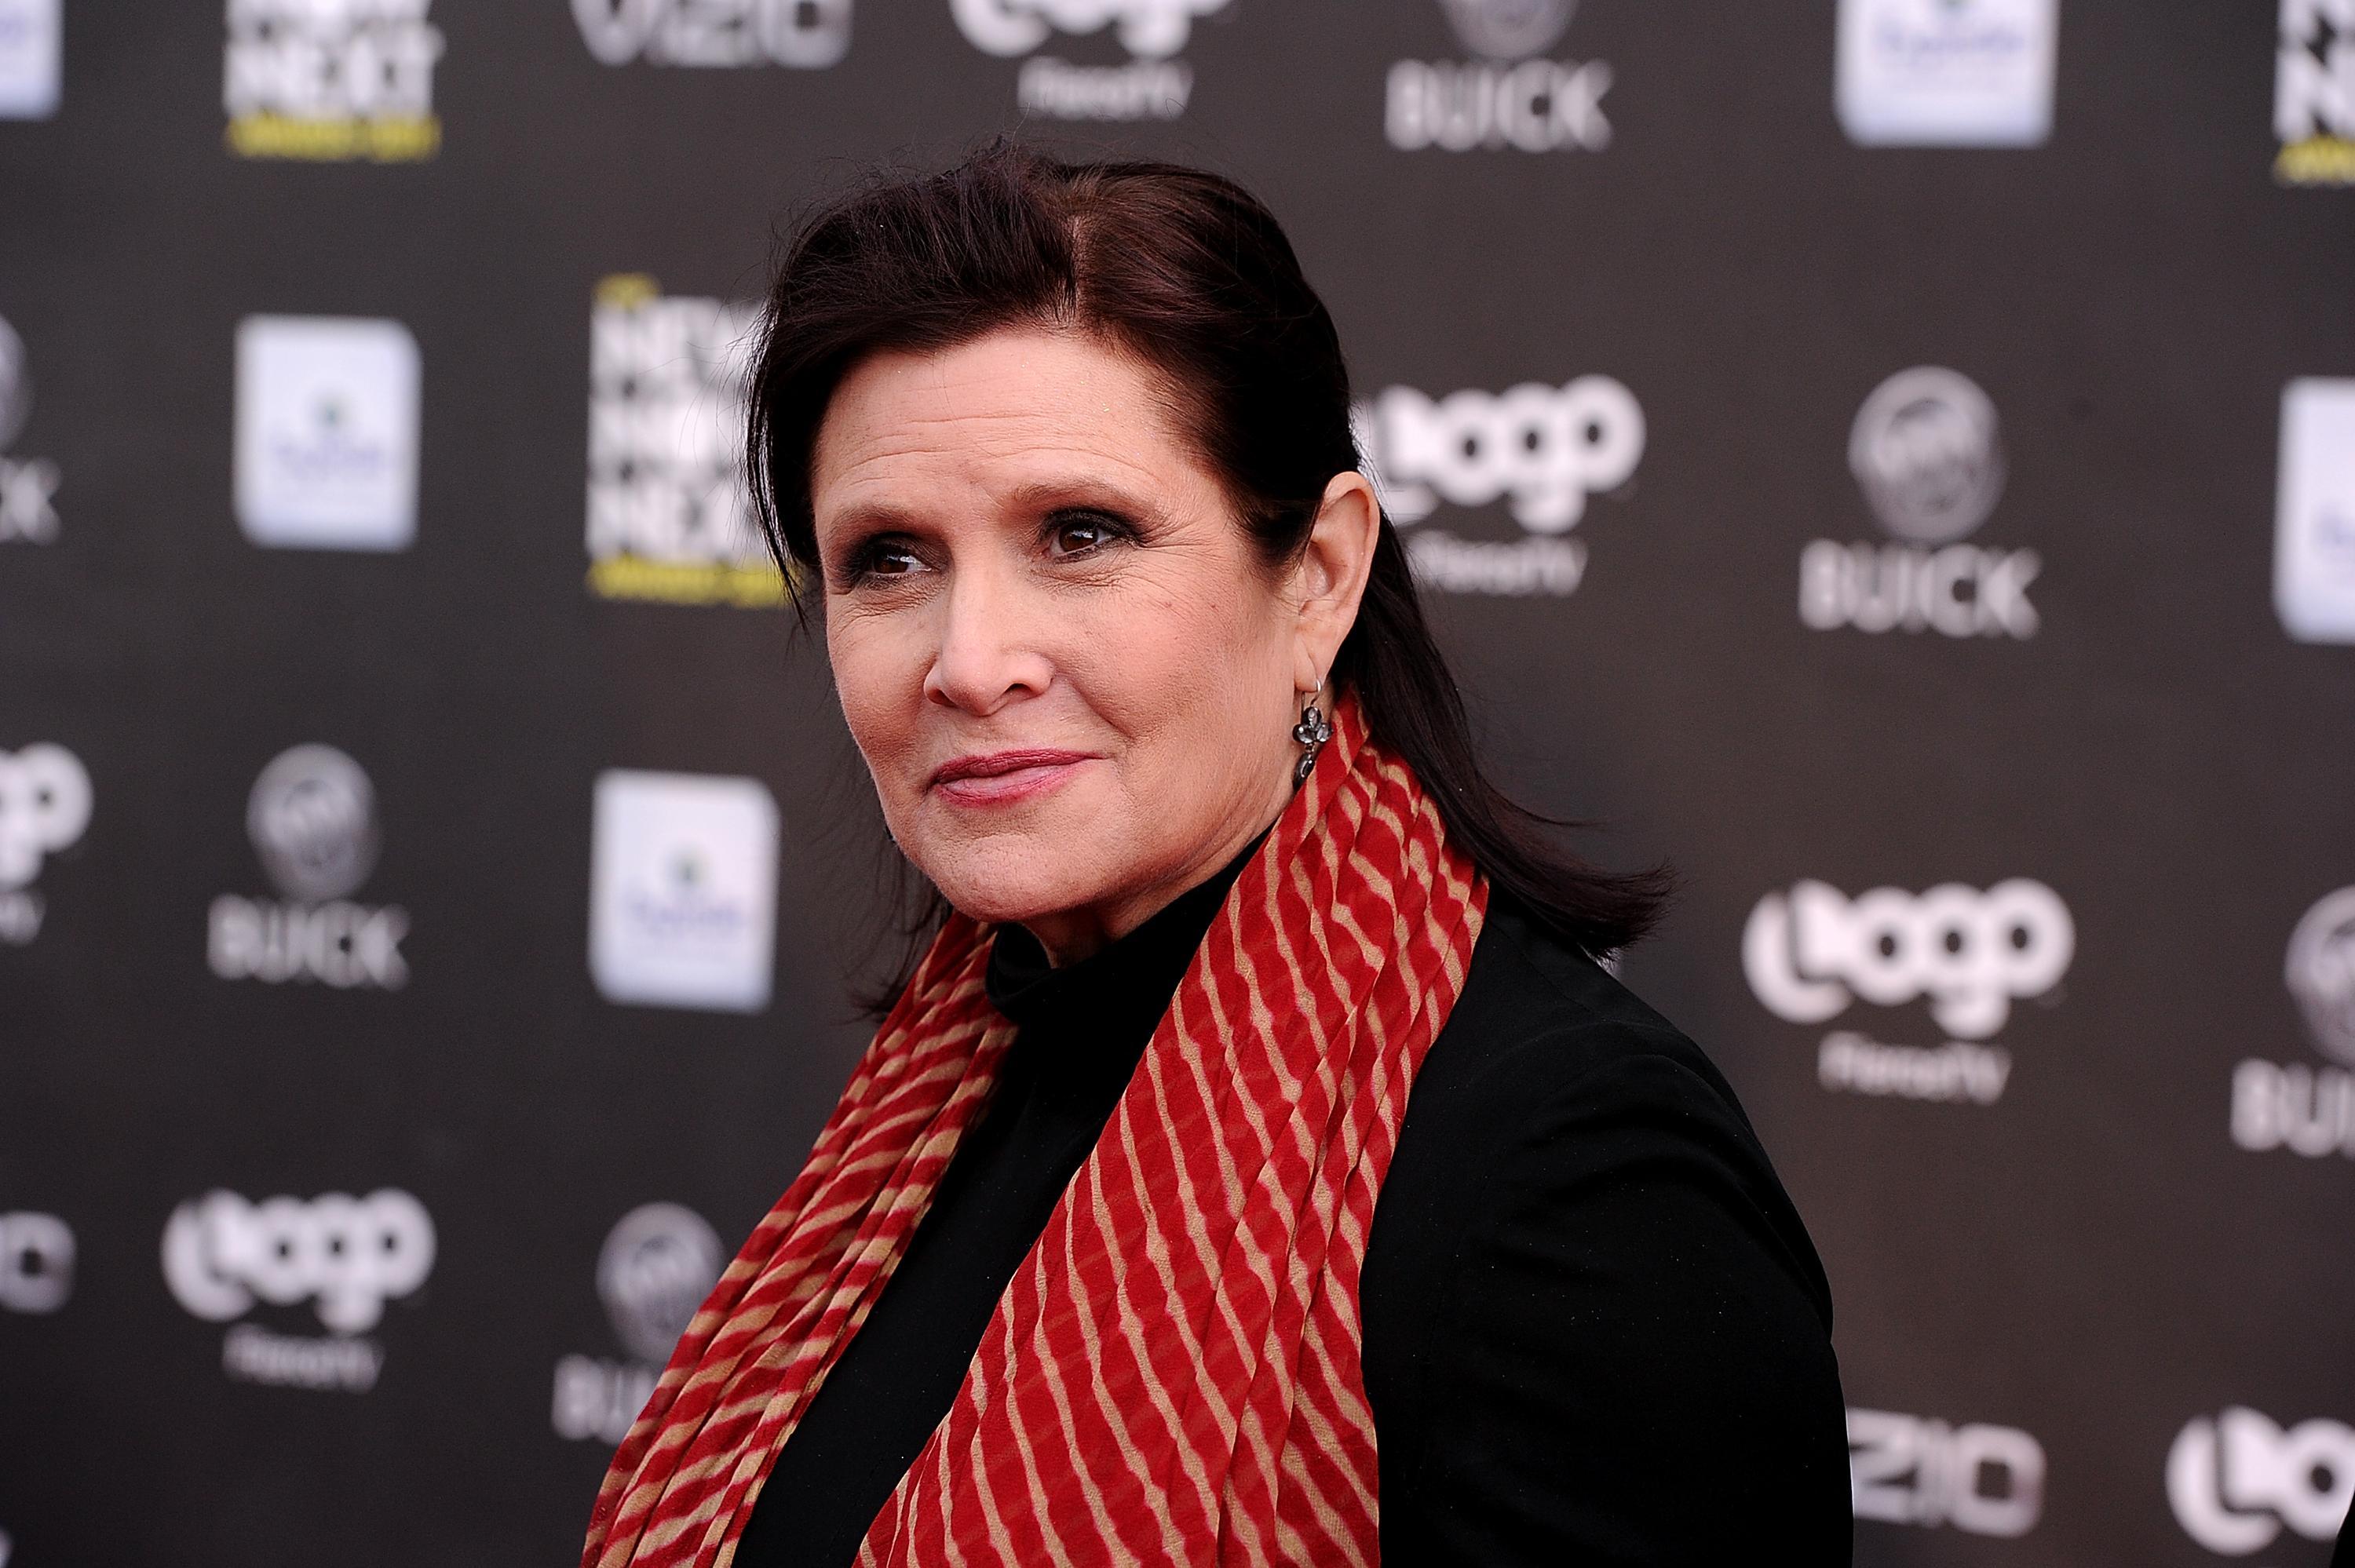 Carrie Fisher attends event.